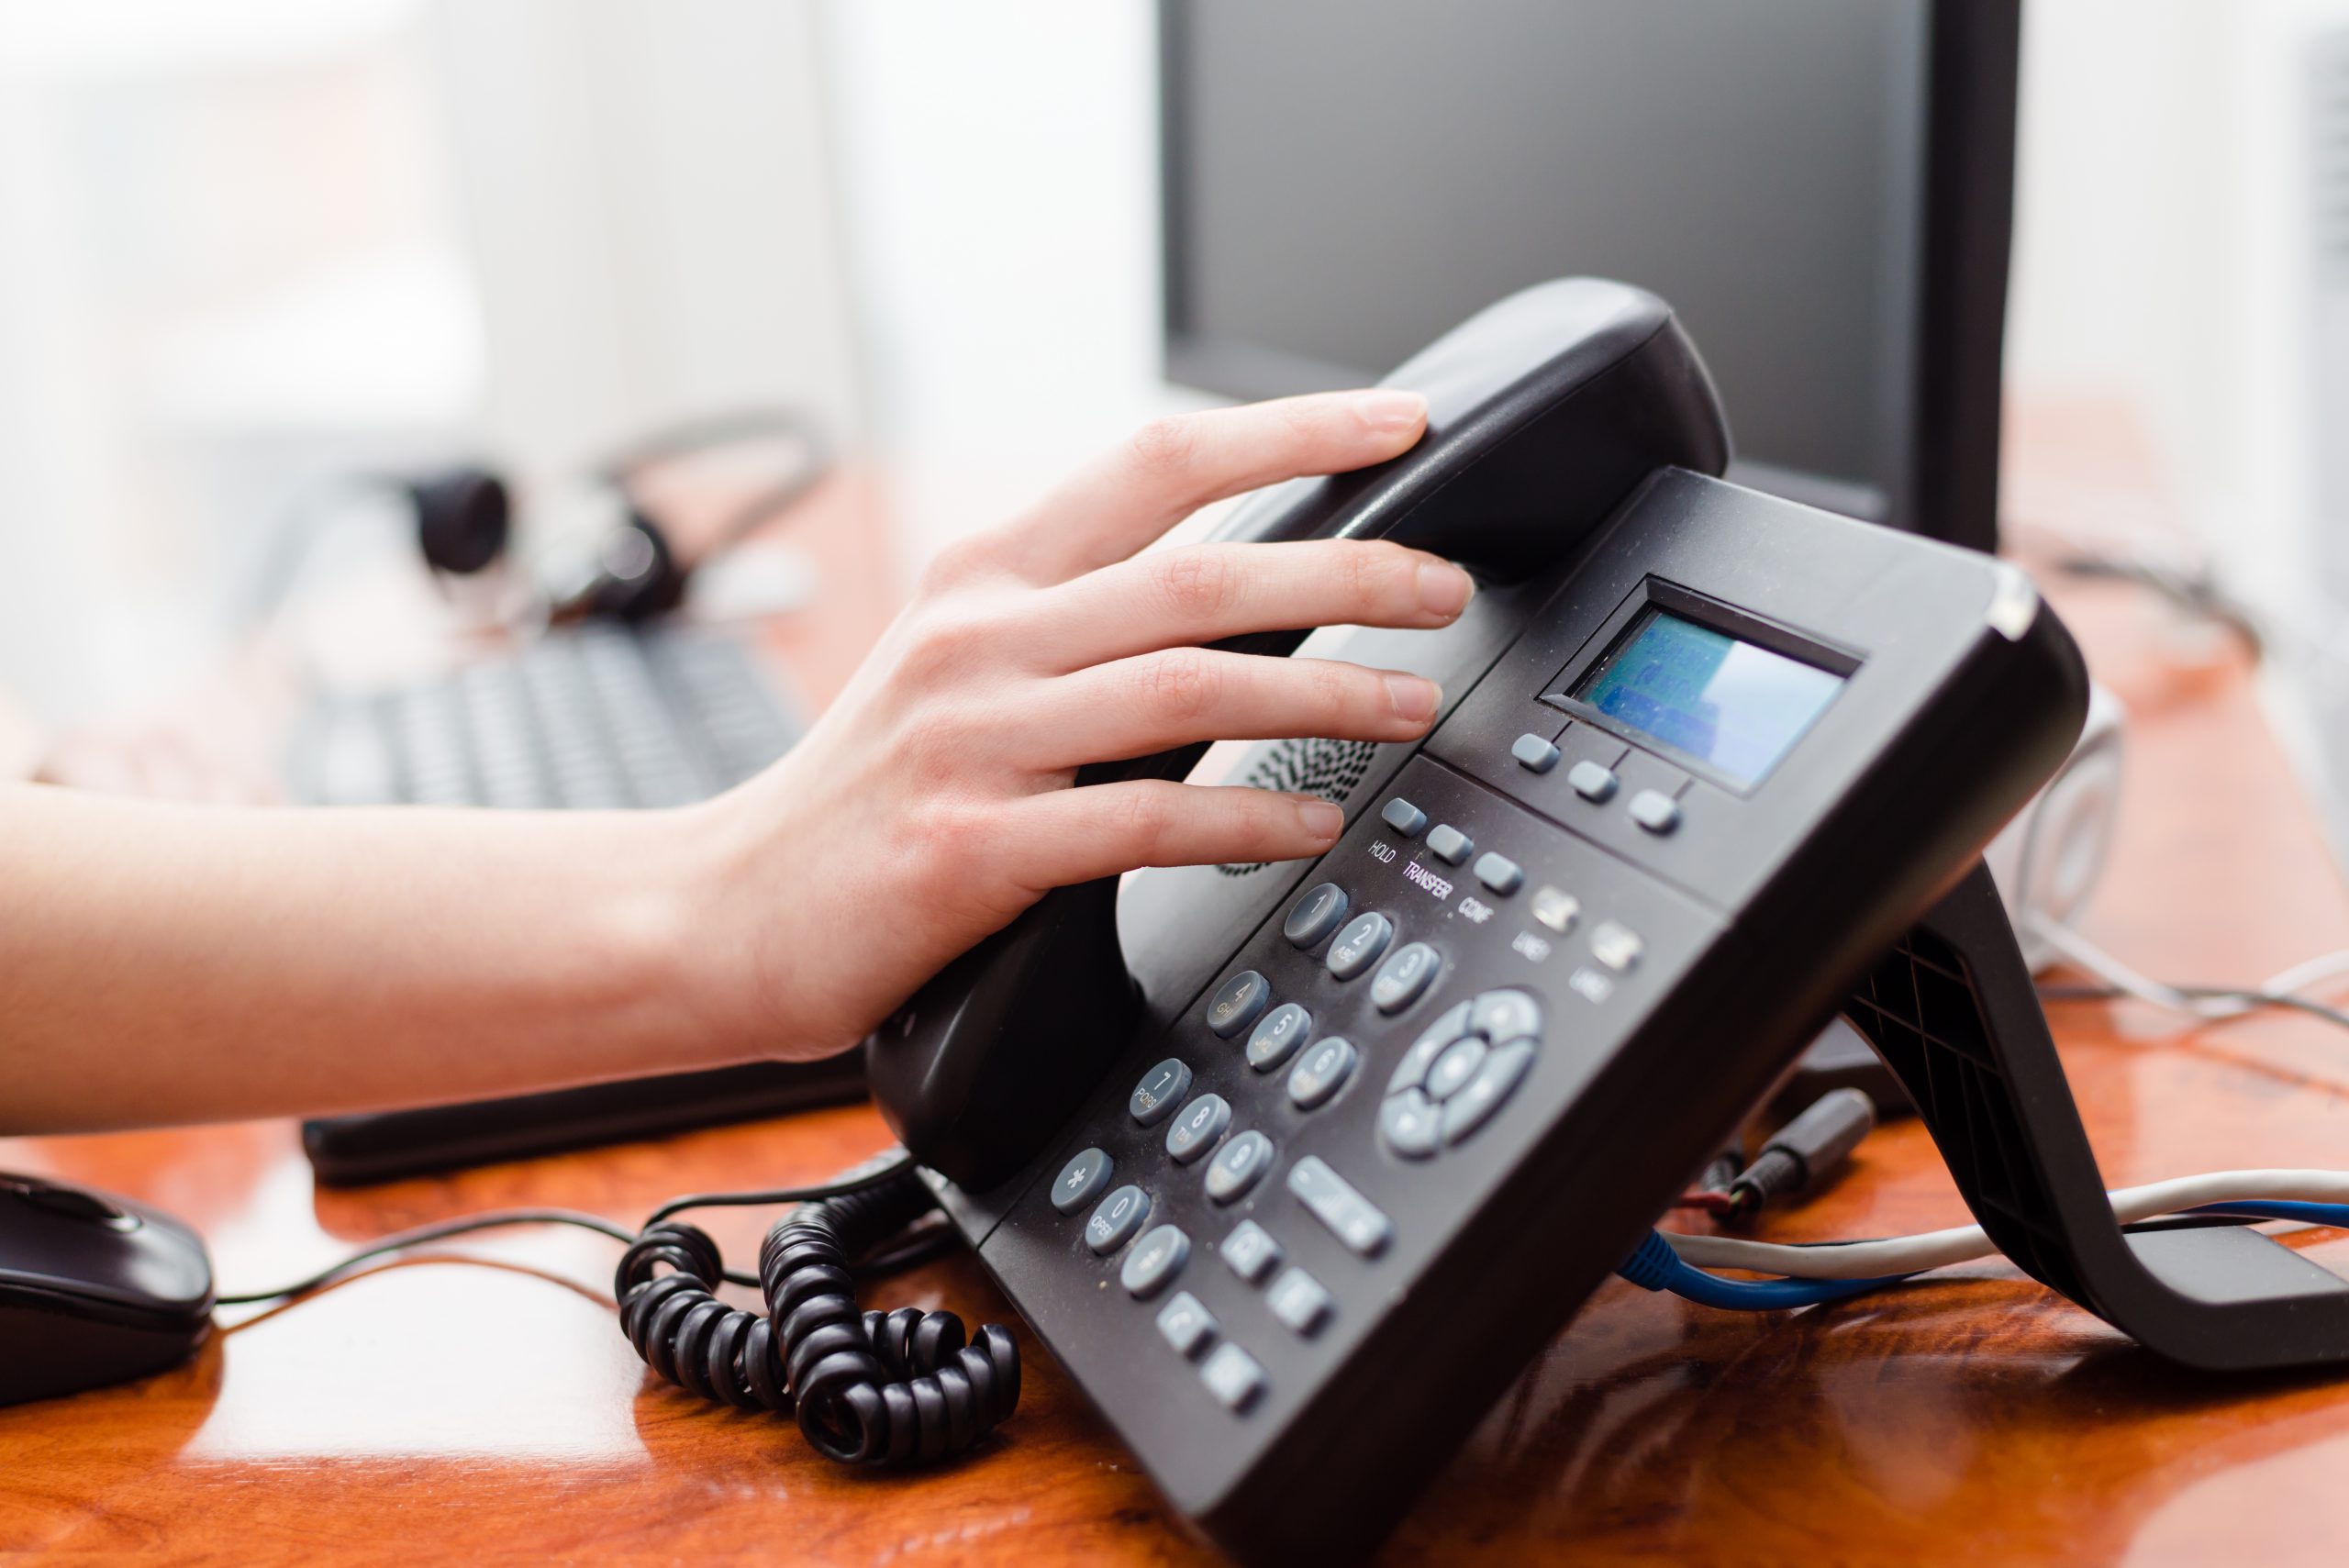 One-in-10 practices spending under £10,000 on digital telephony, survey finds